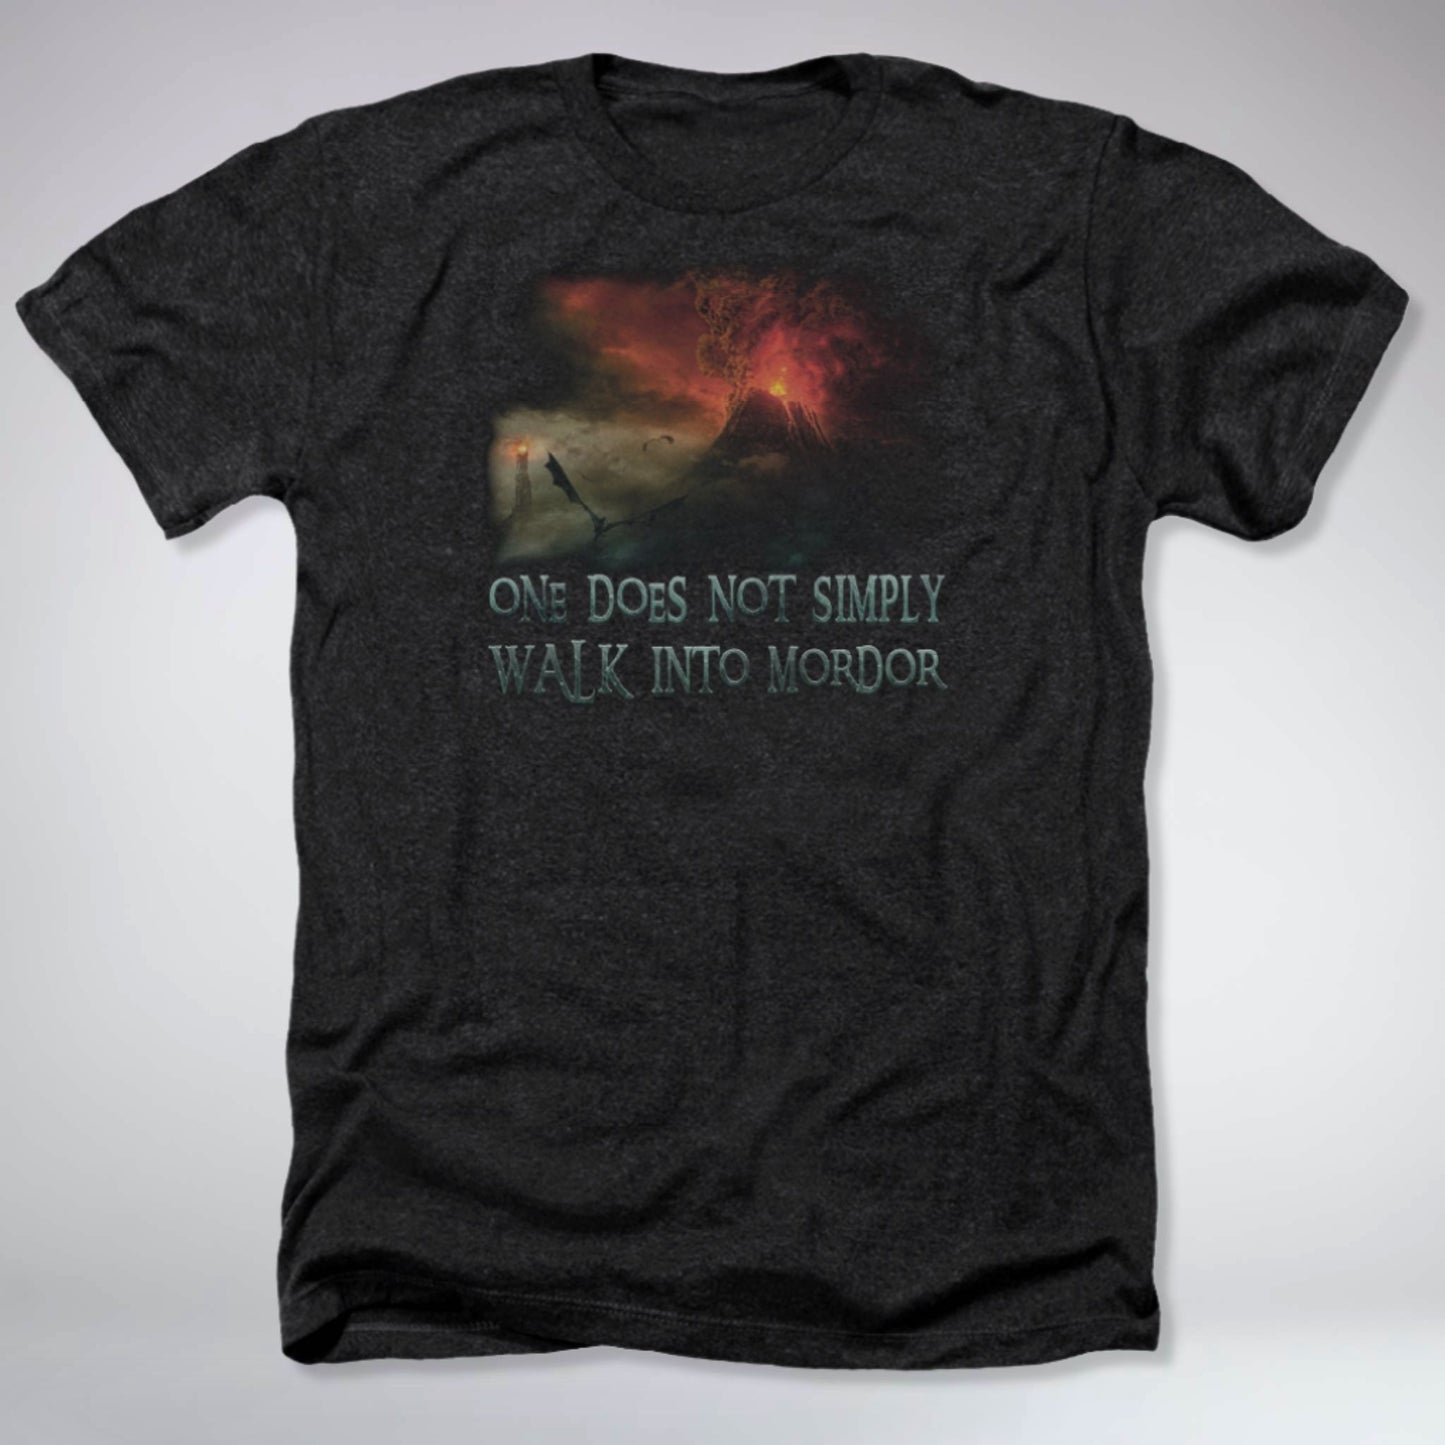 Lord of the Rings Mordor "One Does Not Simply" Shirt (Heather Dark Grey)